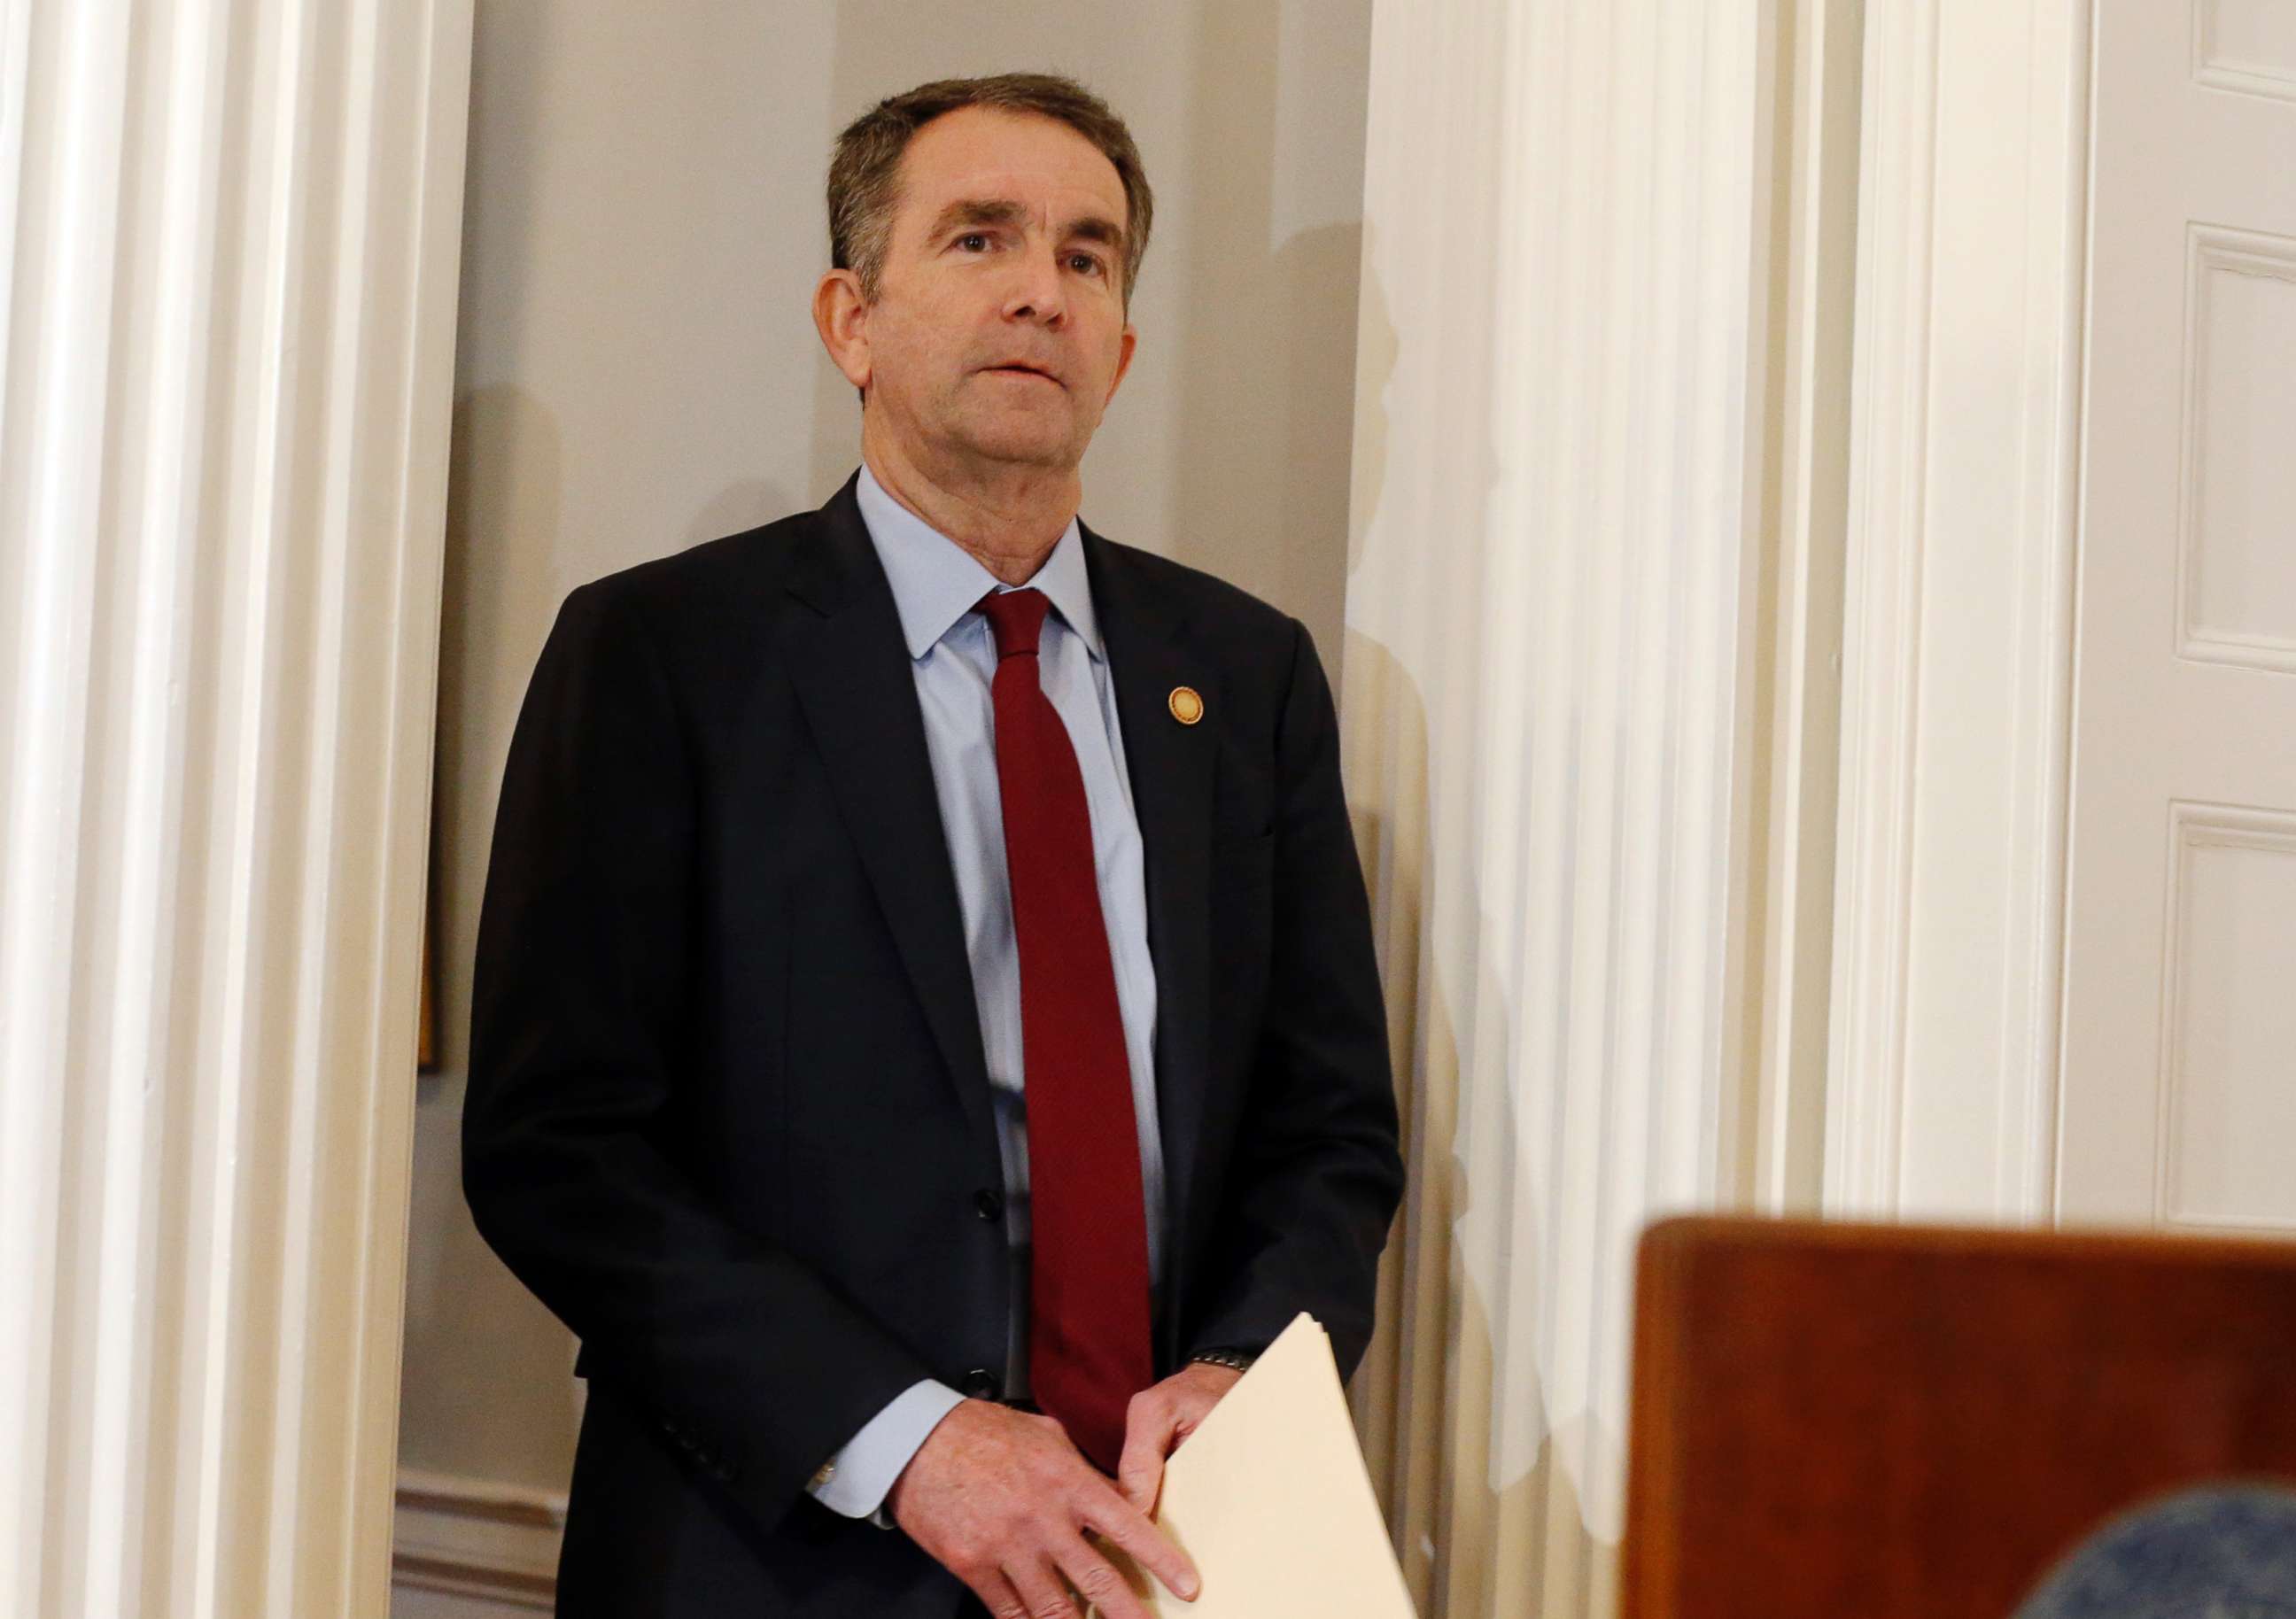 PHOTO: Virginia Gov. Ralph Northam arrives for a news conference in the Governor's Mansion in Richmond, Va., Feb. 2, 2019.